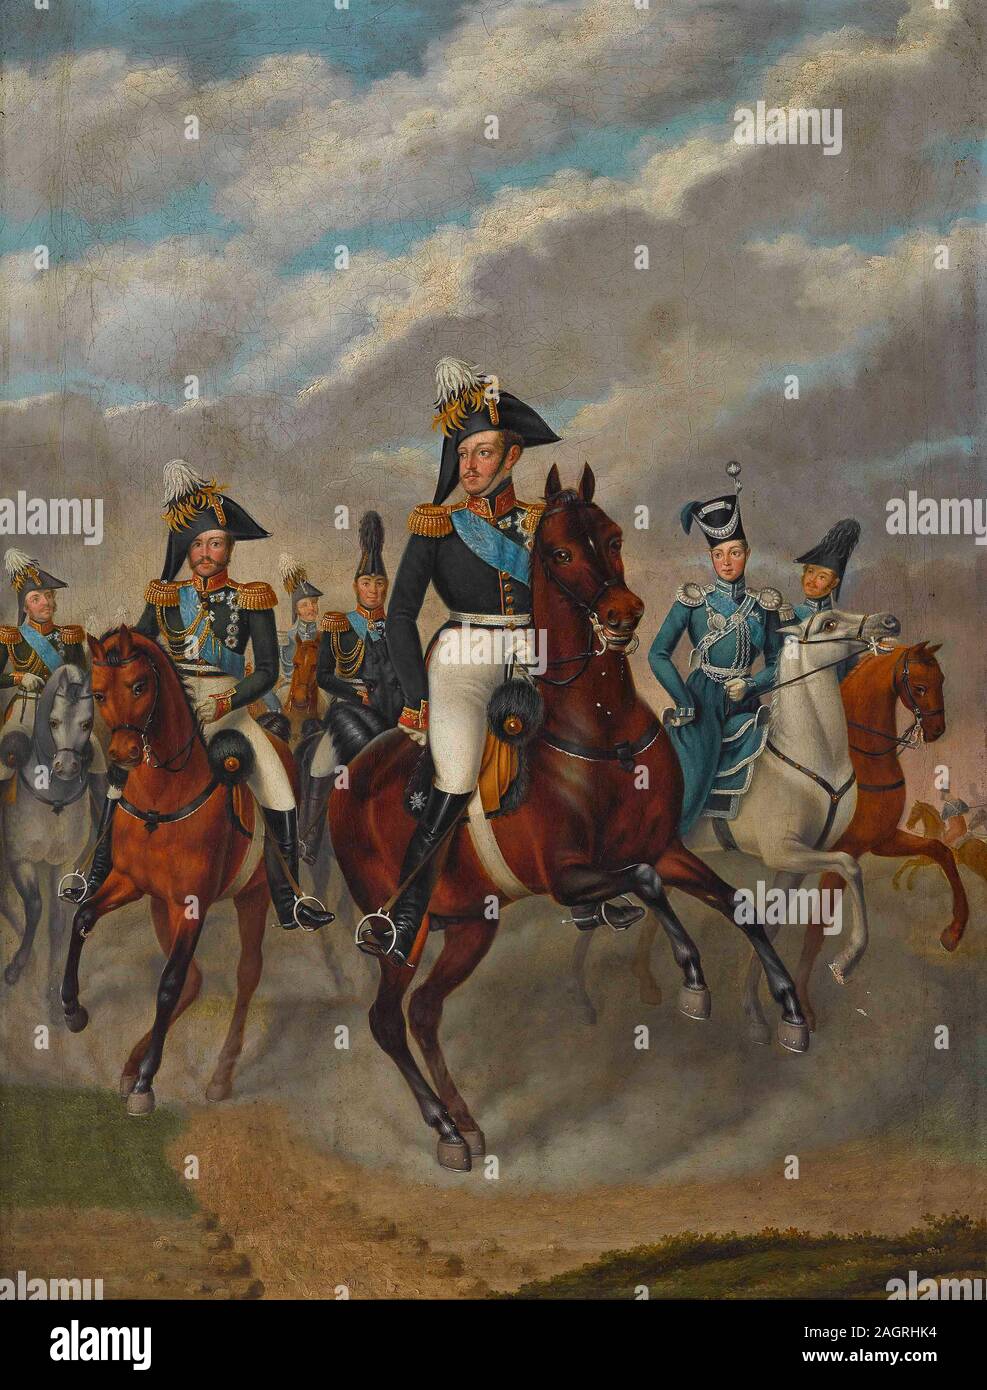 Tsar Nicholas I of Russia with Tsarevich Alexander and his Retinue. Museum: PRIVATE COLLECTION. Author: Franz Krüger. Stock Photo